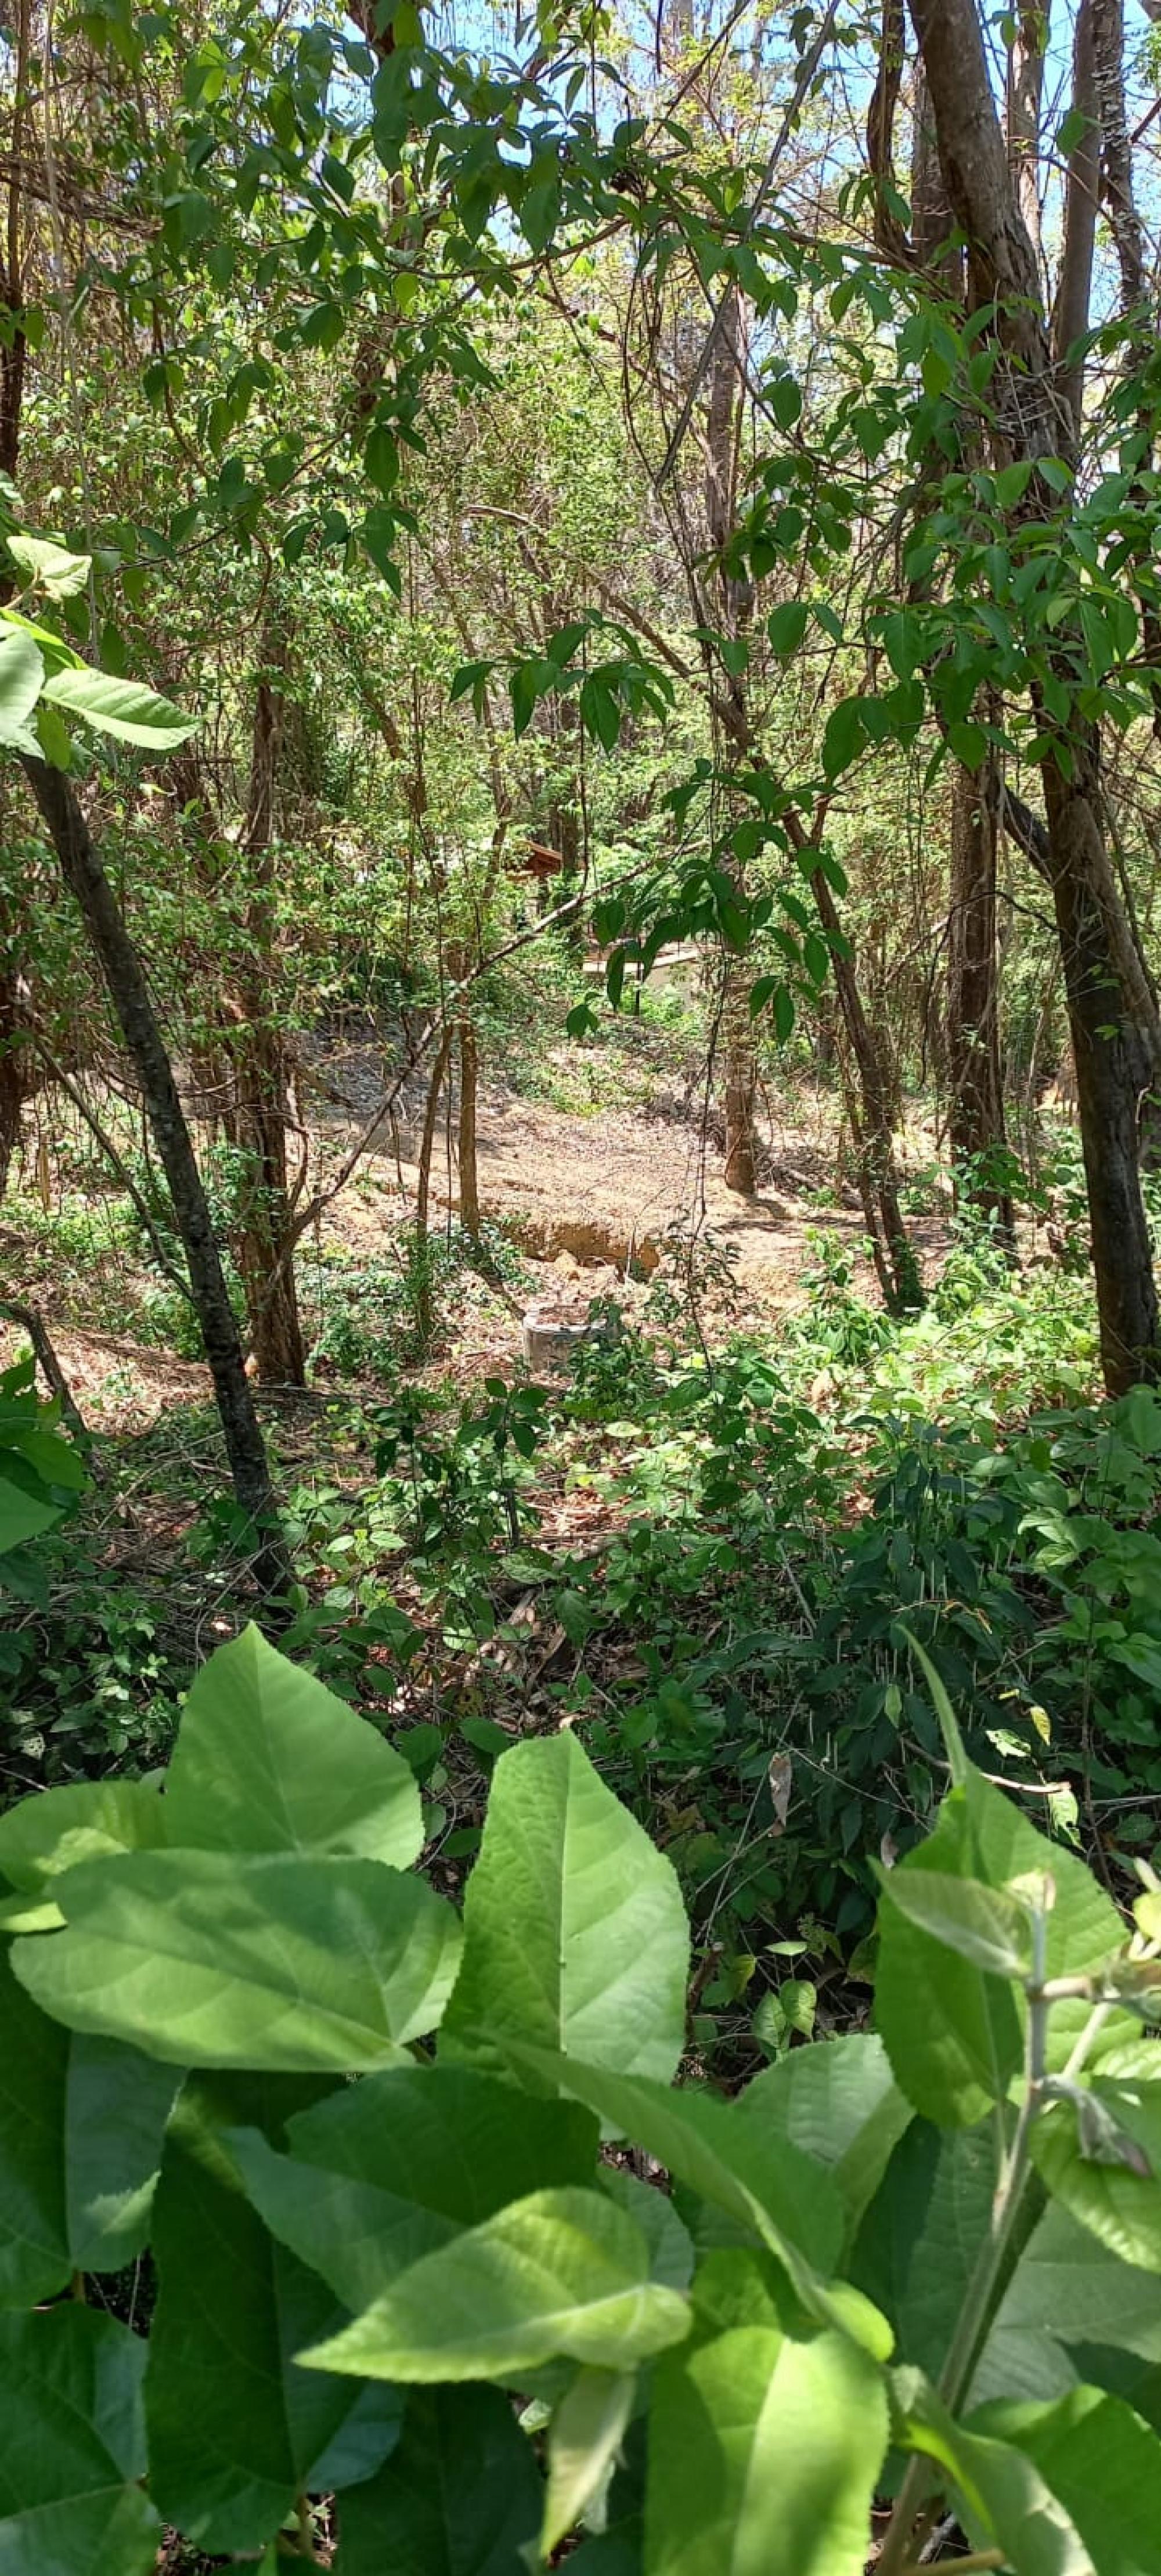 Picture of Residential Lots For Sale in Puntarenas, Puntarenas, Costa Rica